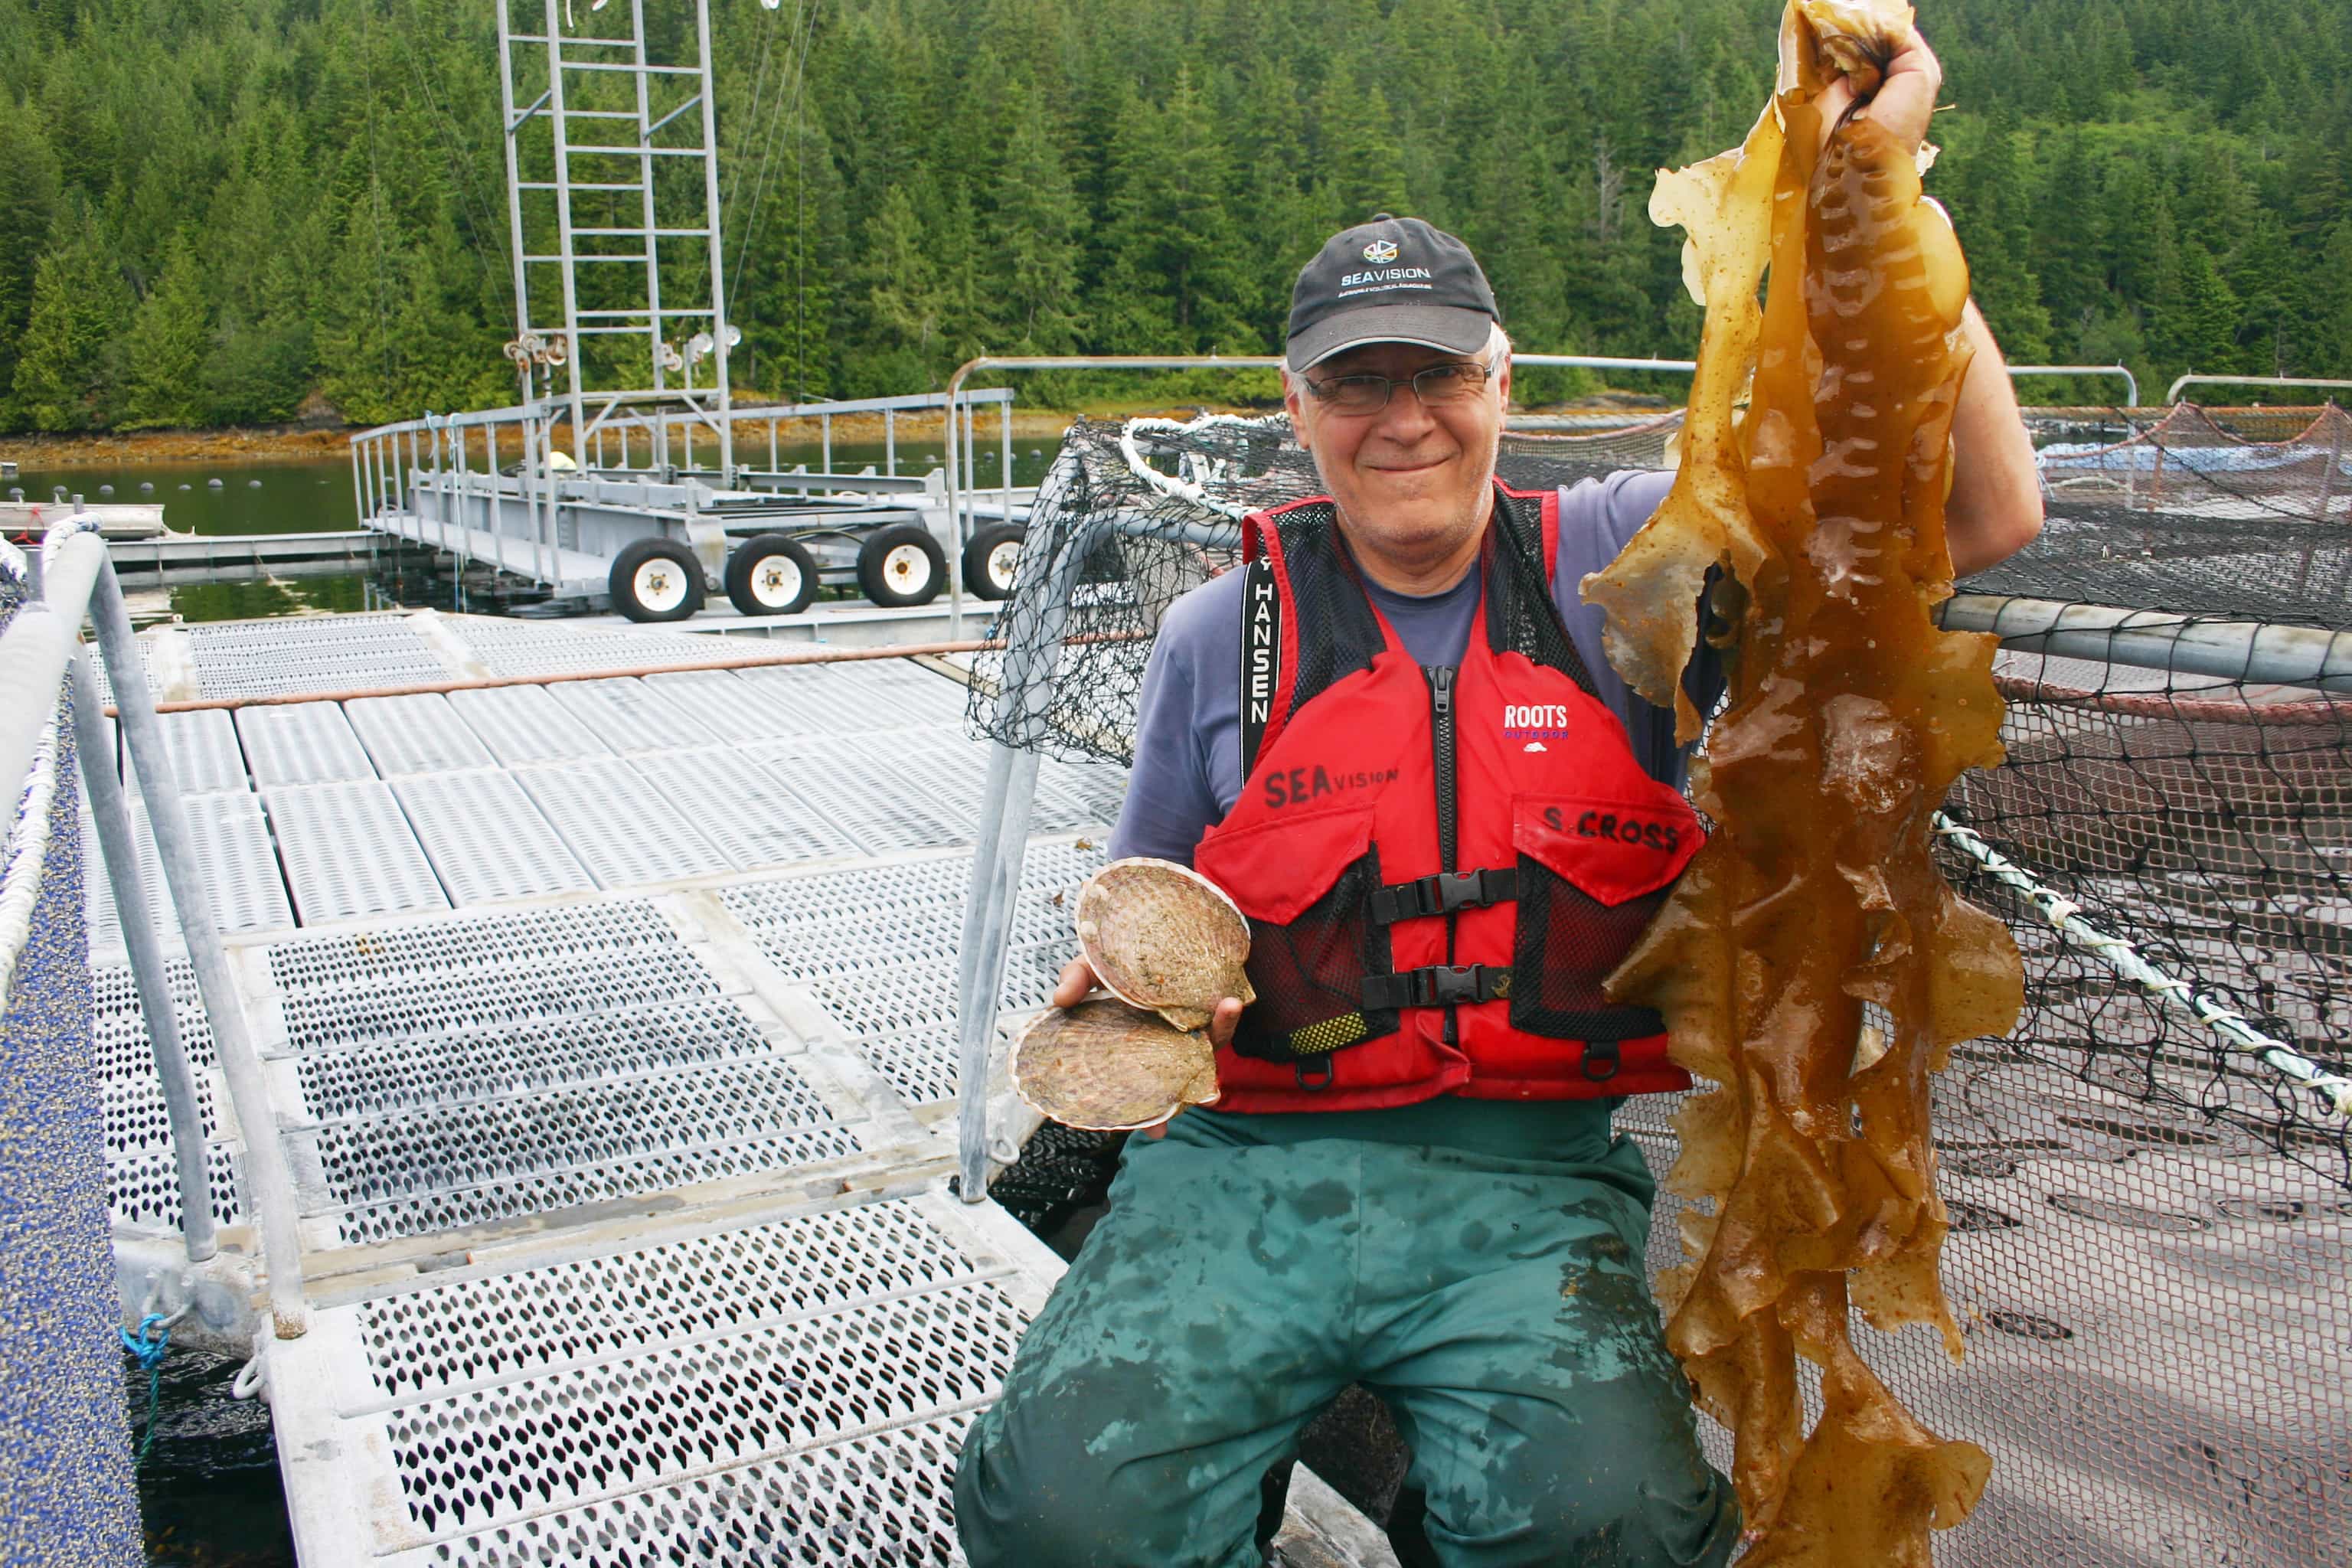 Seaweed farming can boost aquaculture opportunities in B.C.